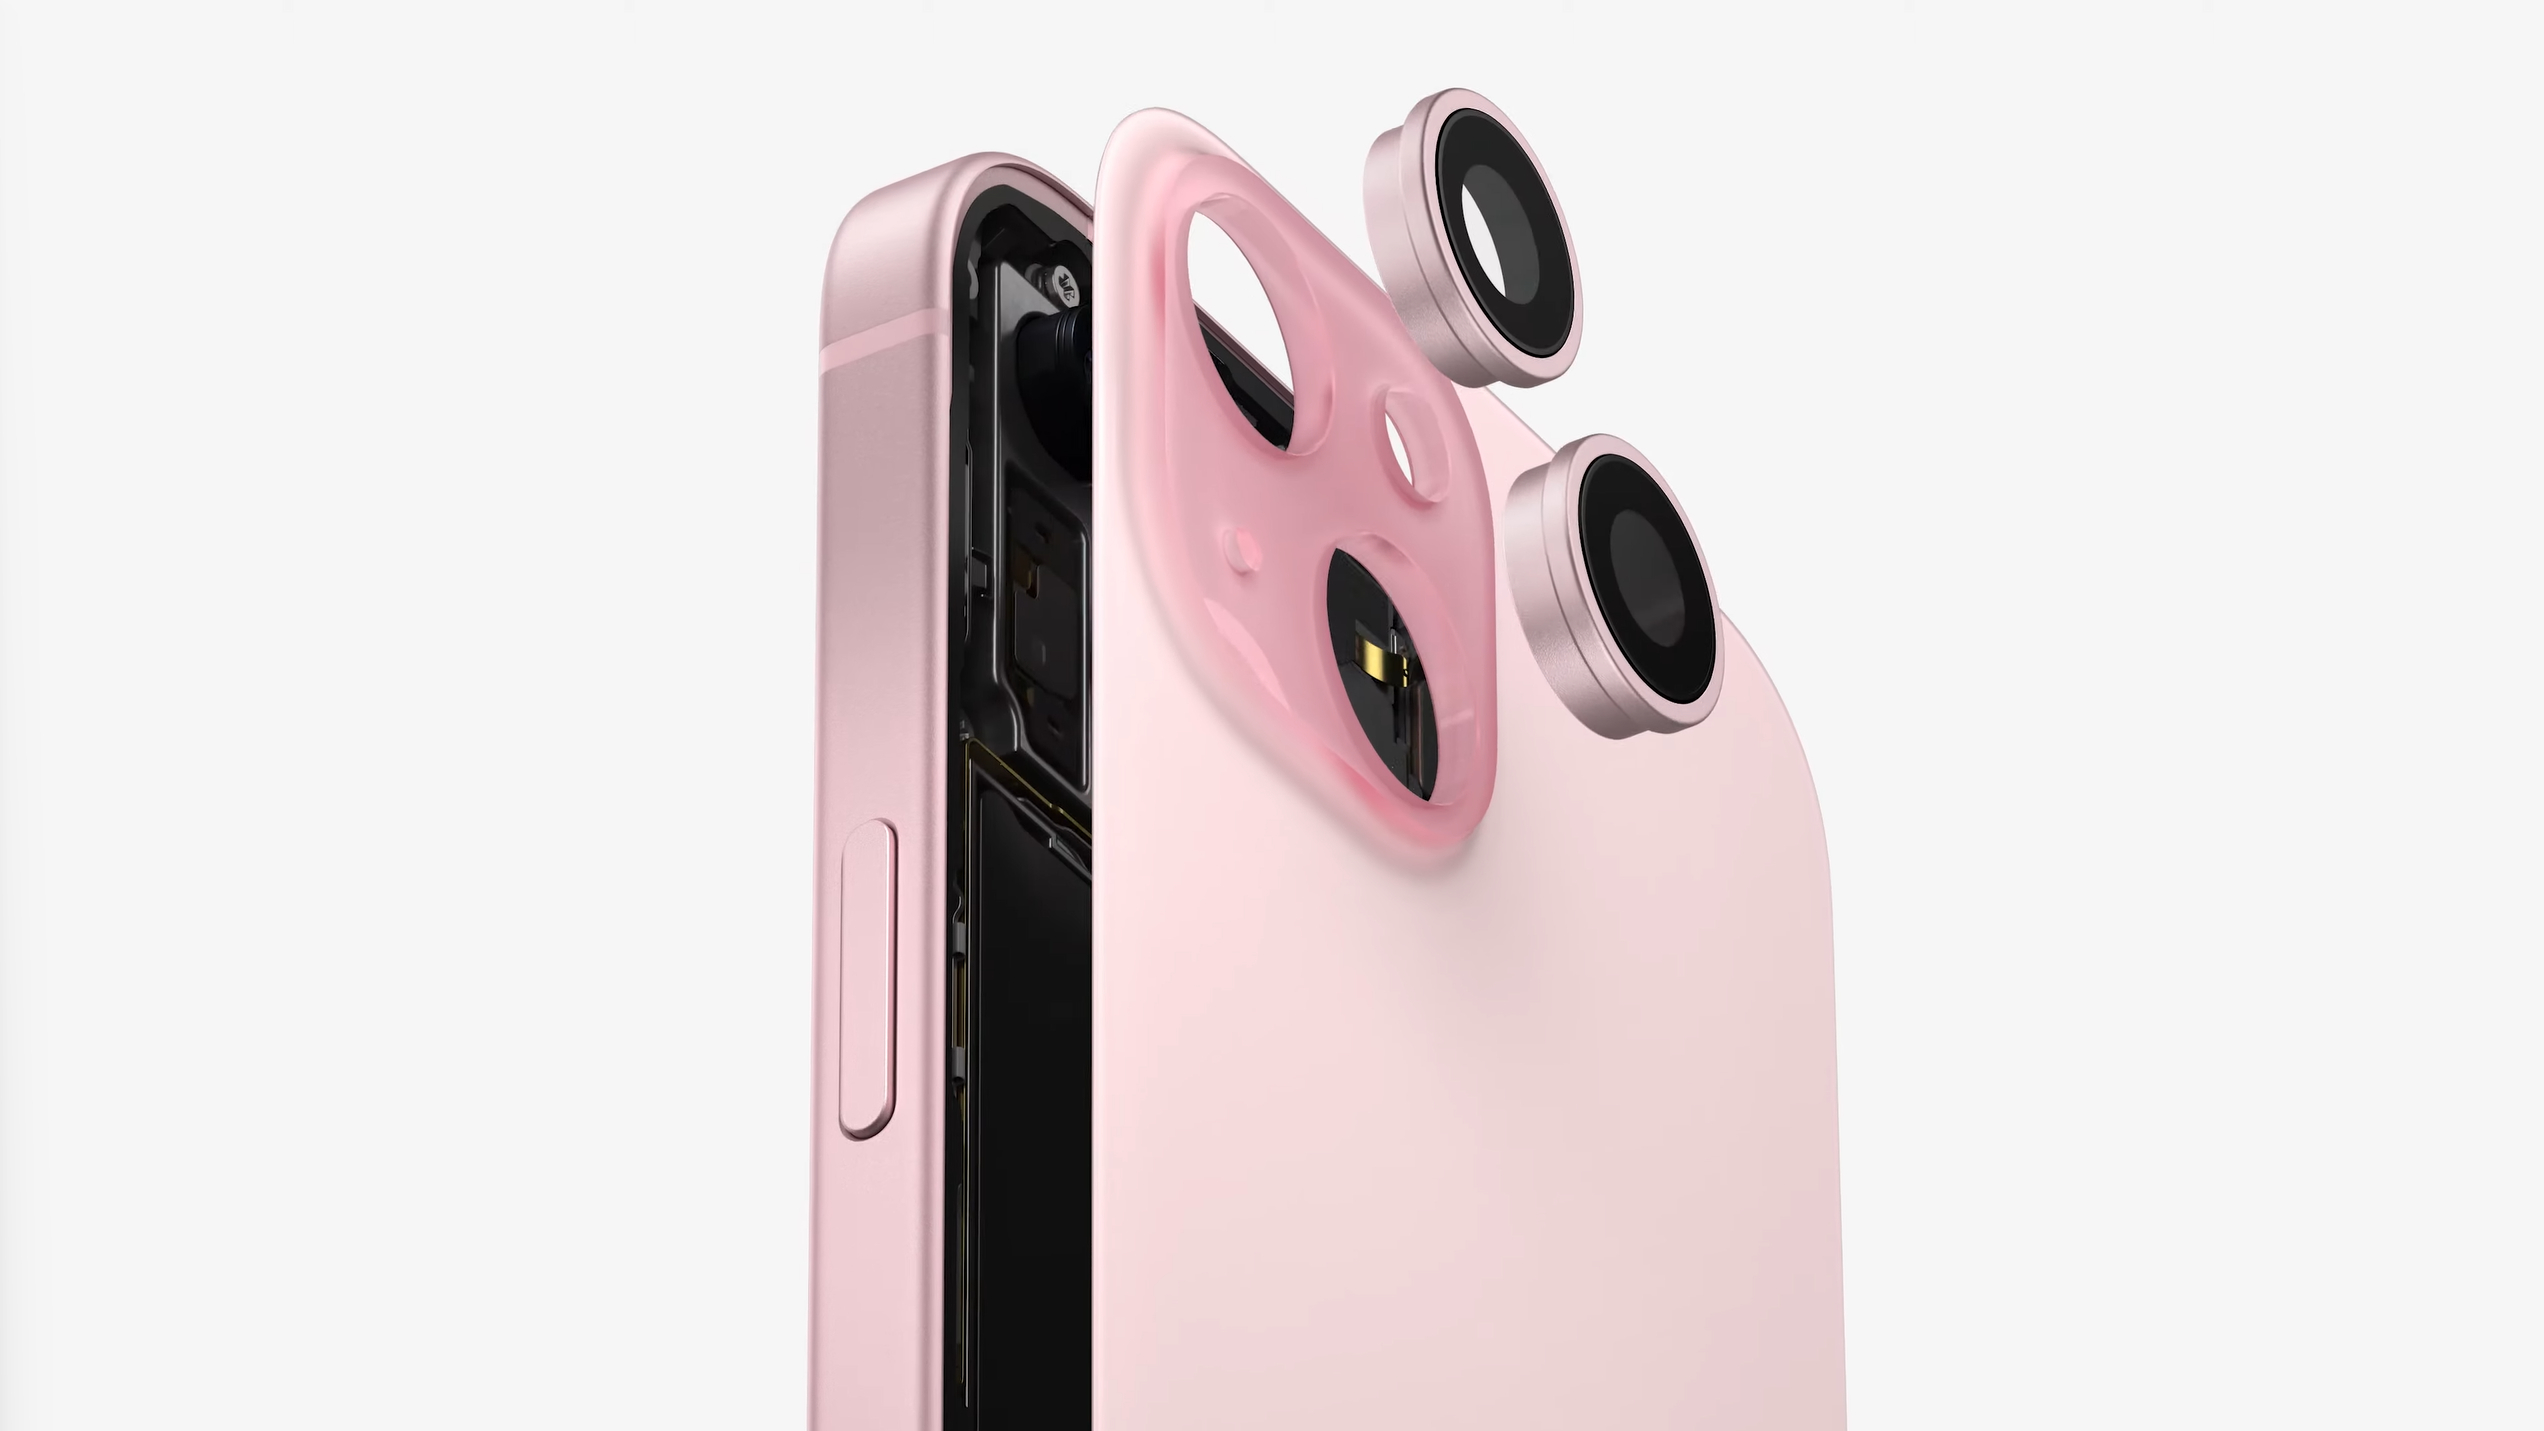 The pink Apple iPhone 15 with its camera lenses exploding off in a controlled way